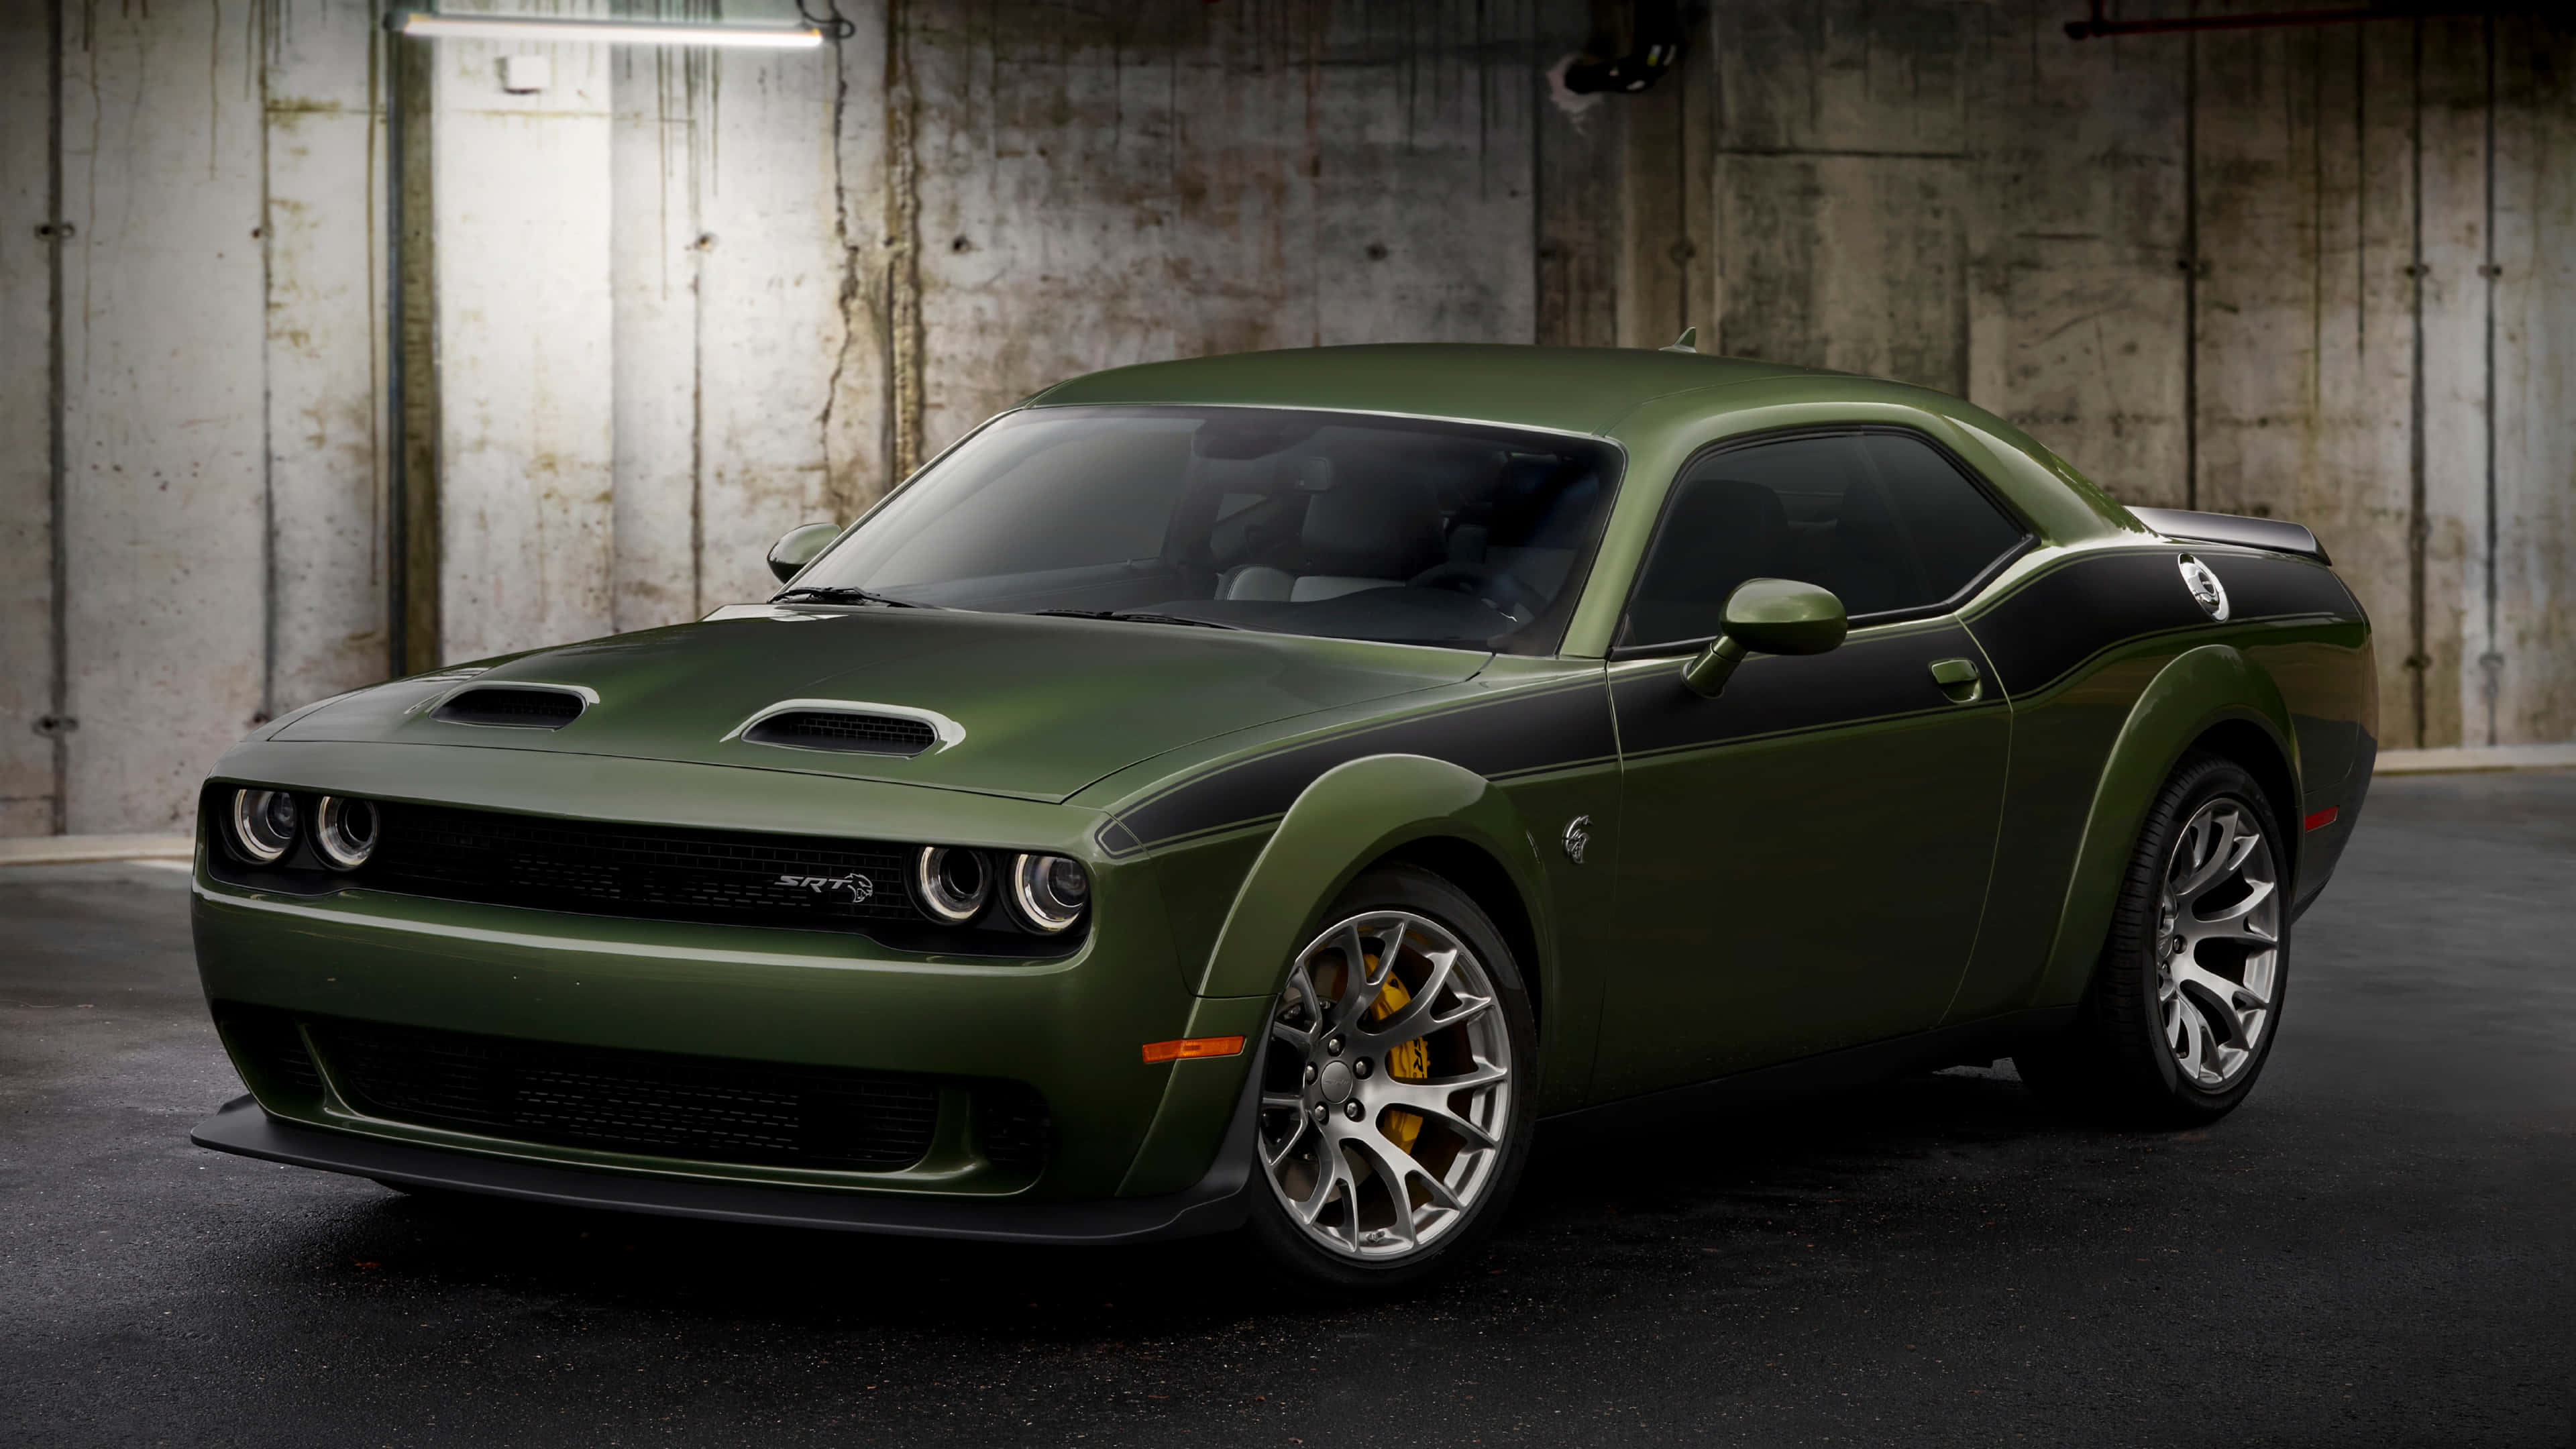 Powerful and Stylish - The Dodge Hellcat Wallpaper